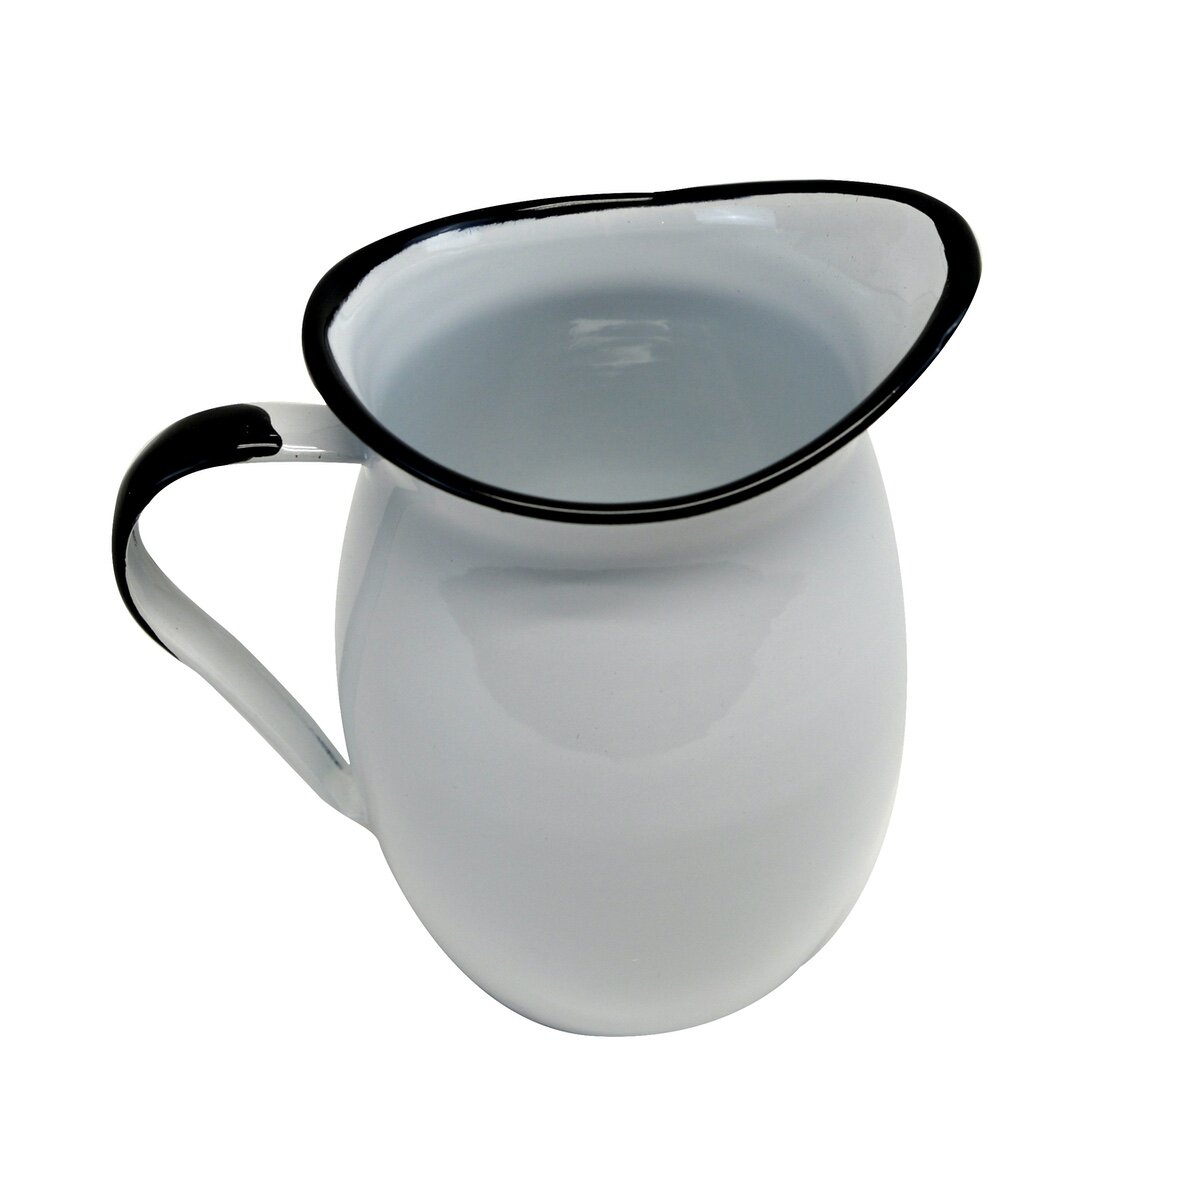 Vintage Small White Enamel Water/Milk Pitcher with Black Enamel Trim and  Handle